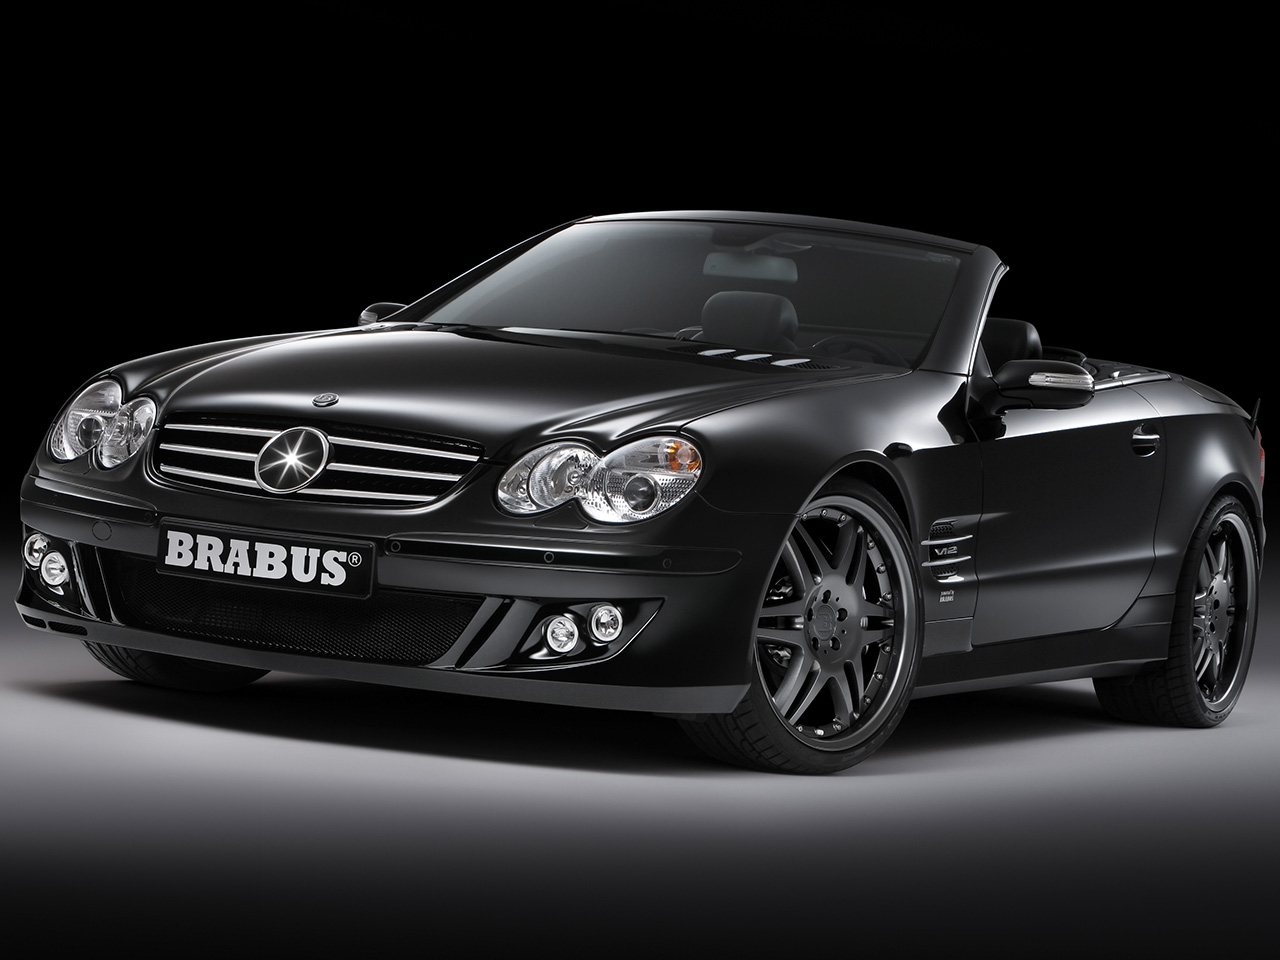 14478025662006-BRABUS-SV12-S-Biturbo-Roadster-Mercedes-Benz-SL-Class-Front-Angle-Top-Down-1280x960